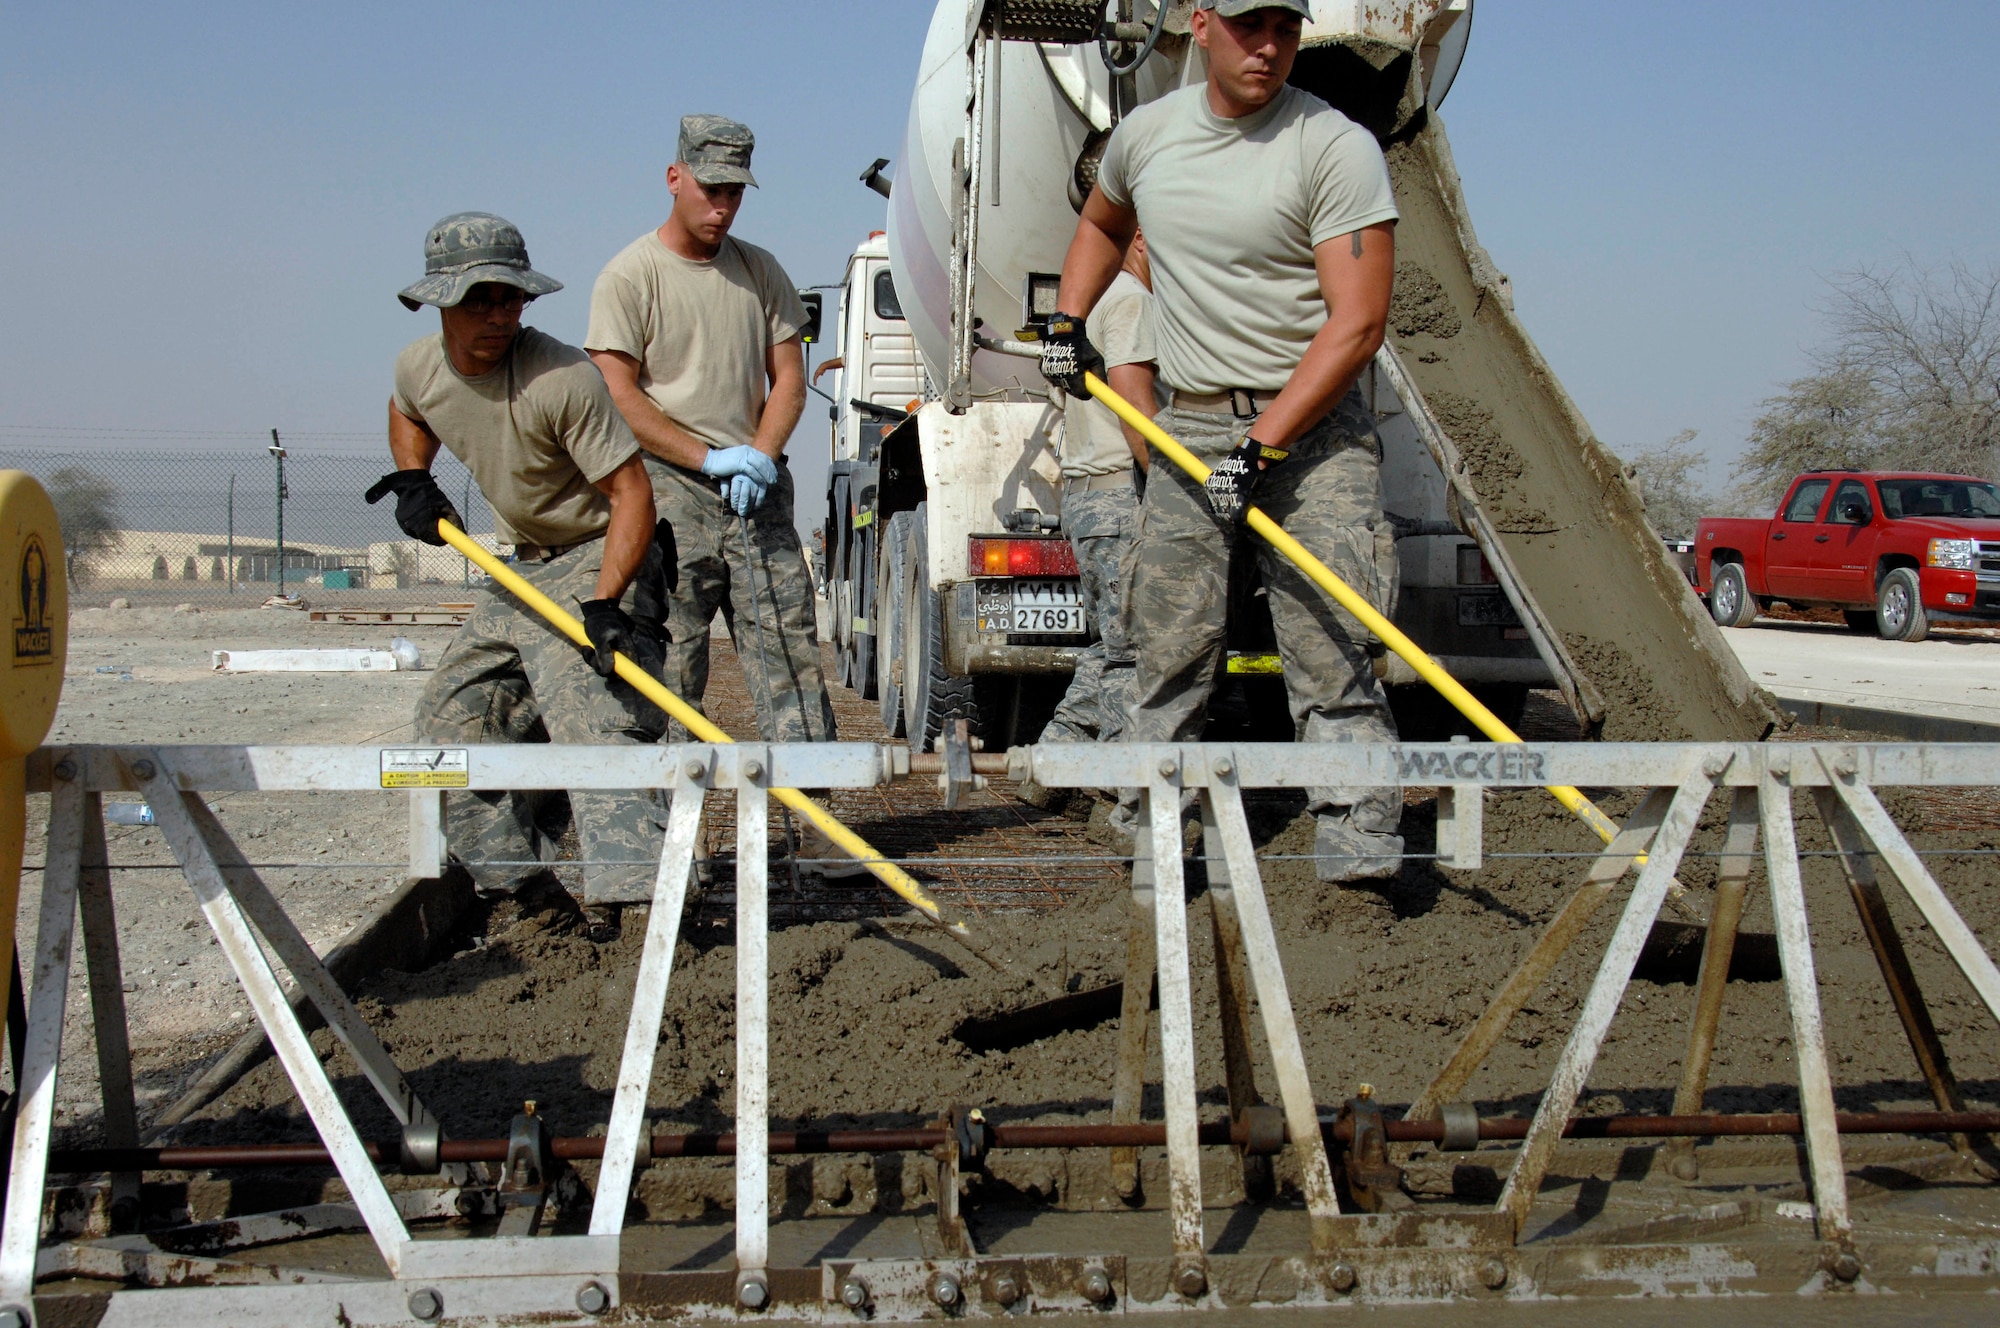 SOUTHWEST ASIA -- Airman 1st Class Francisco Bautista, from the 380th Expeditionary Civil Engineering Squadron, smooths concrete for the foundation of a new gym here. This is Airman Bautista's first deployment. (U.S. Air Force photo by Staff Sgt. Mike Andriacco) (Released)